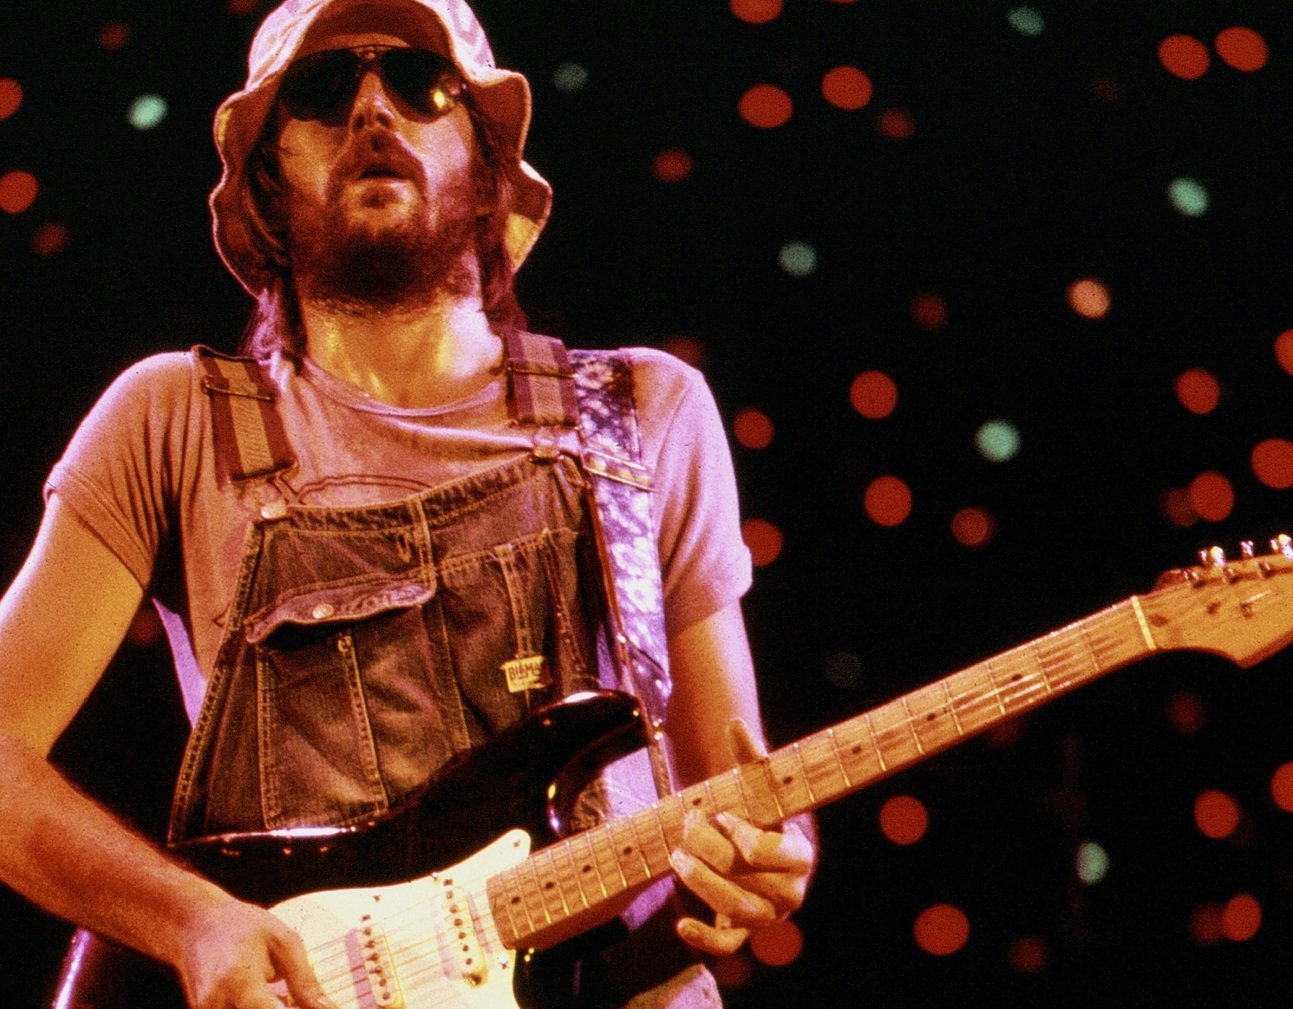 Eric Clapton plays guitar wearing overalls and sunglasses on stage in 1974